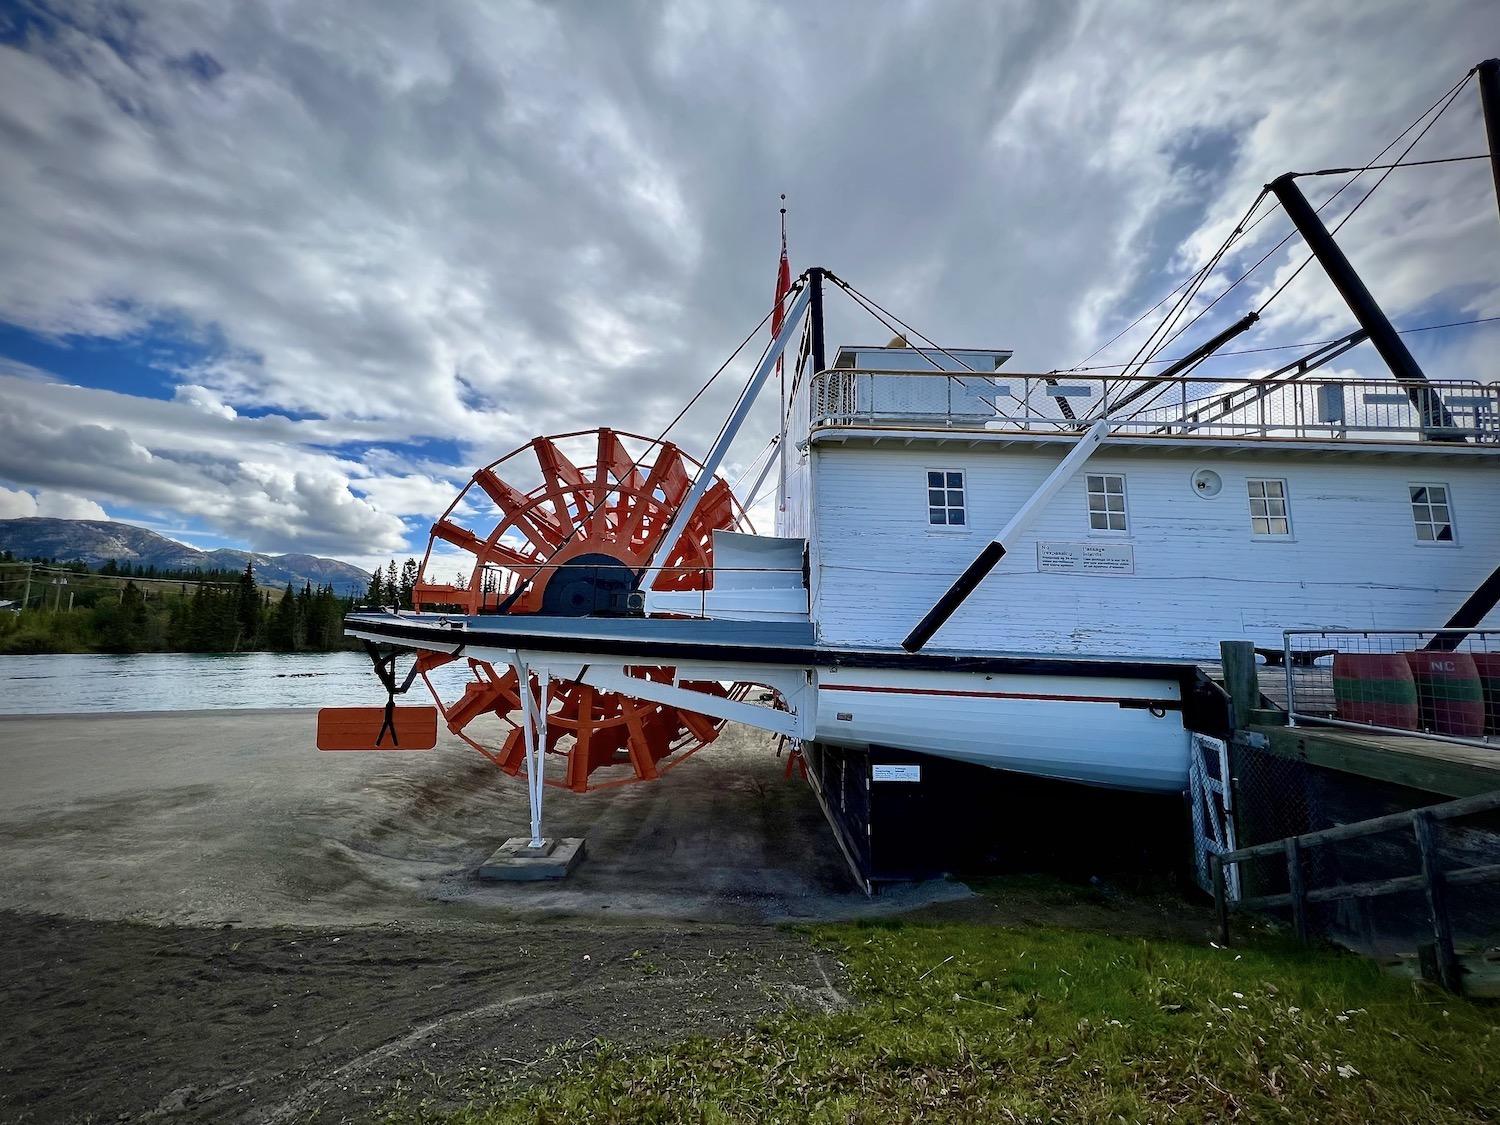 The S.S. Klondike is a sternwheeler from the golden era of Yukon riverboats.